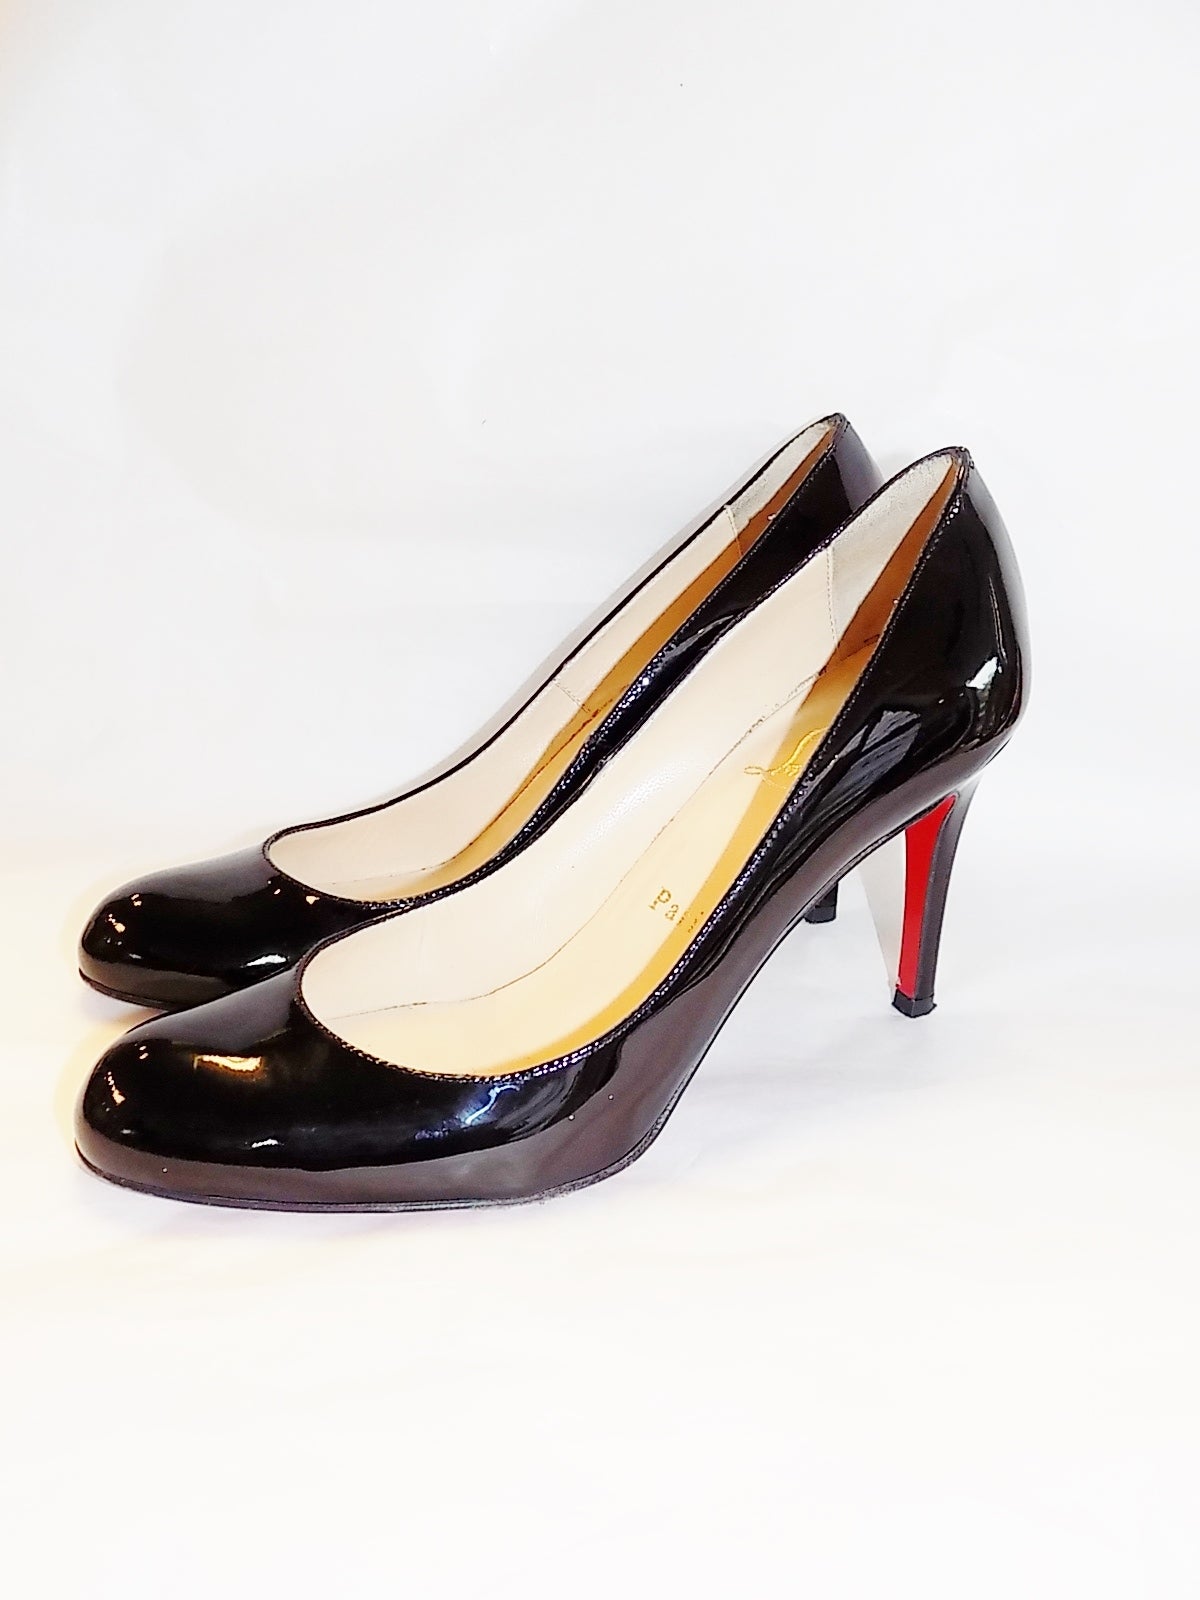 Christian Louboutin black simple pump patent calf leather sz 37 In Excellent Condition For Sale In New York, NY